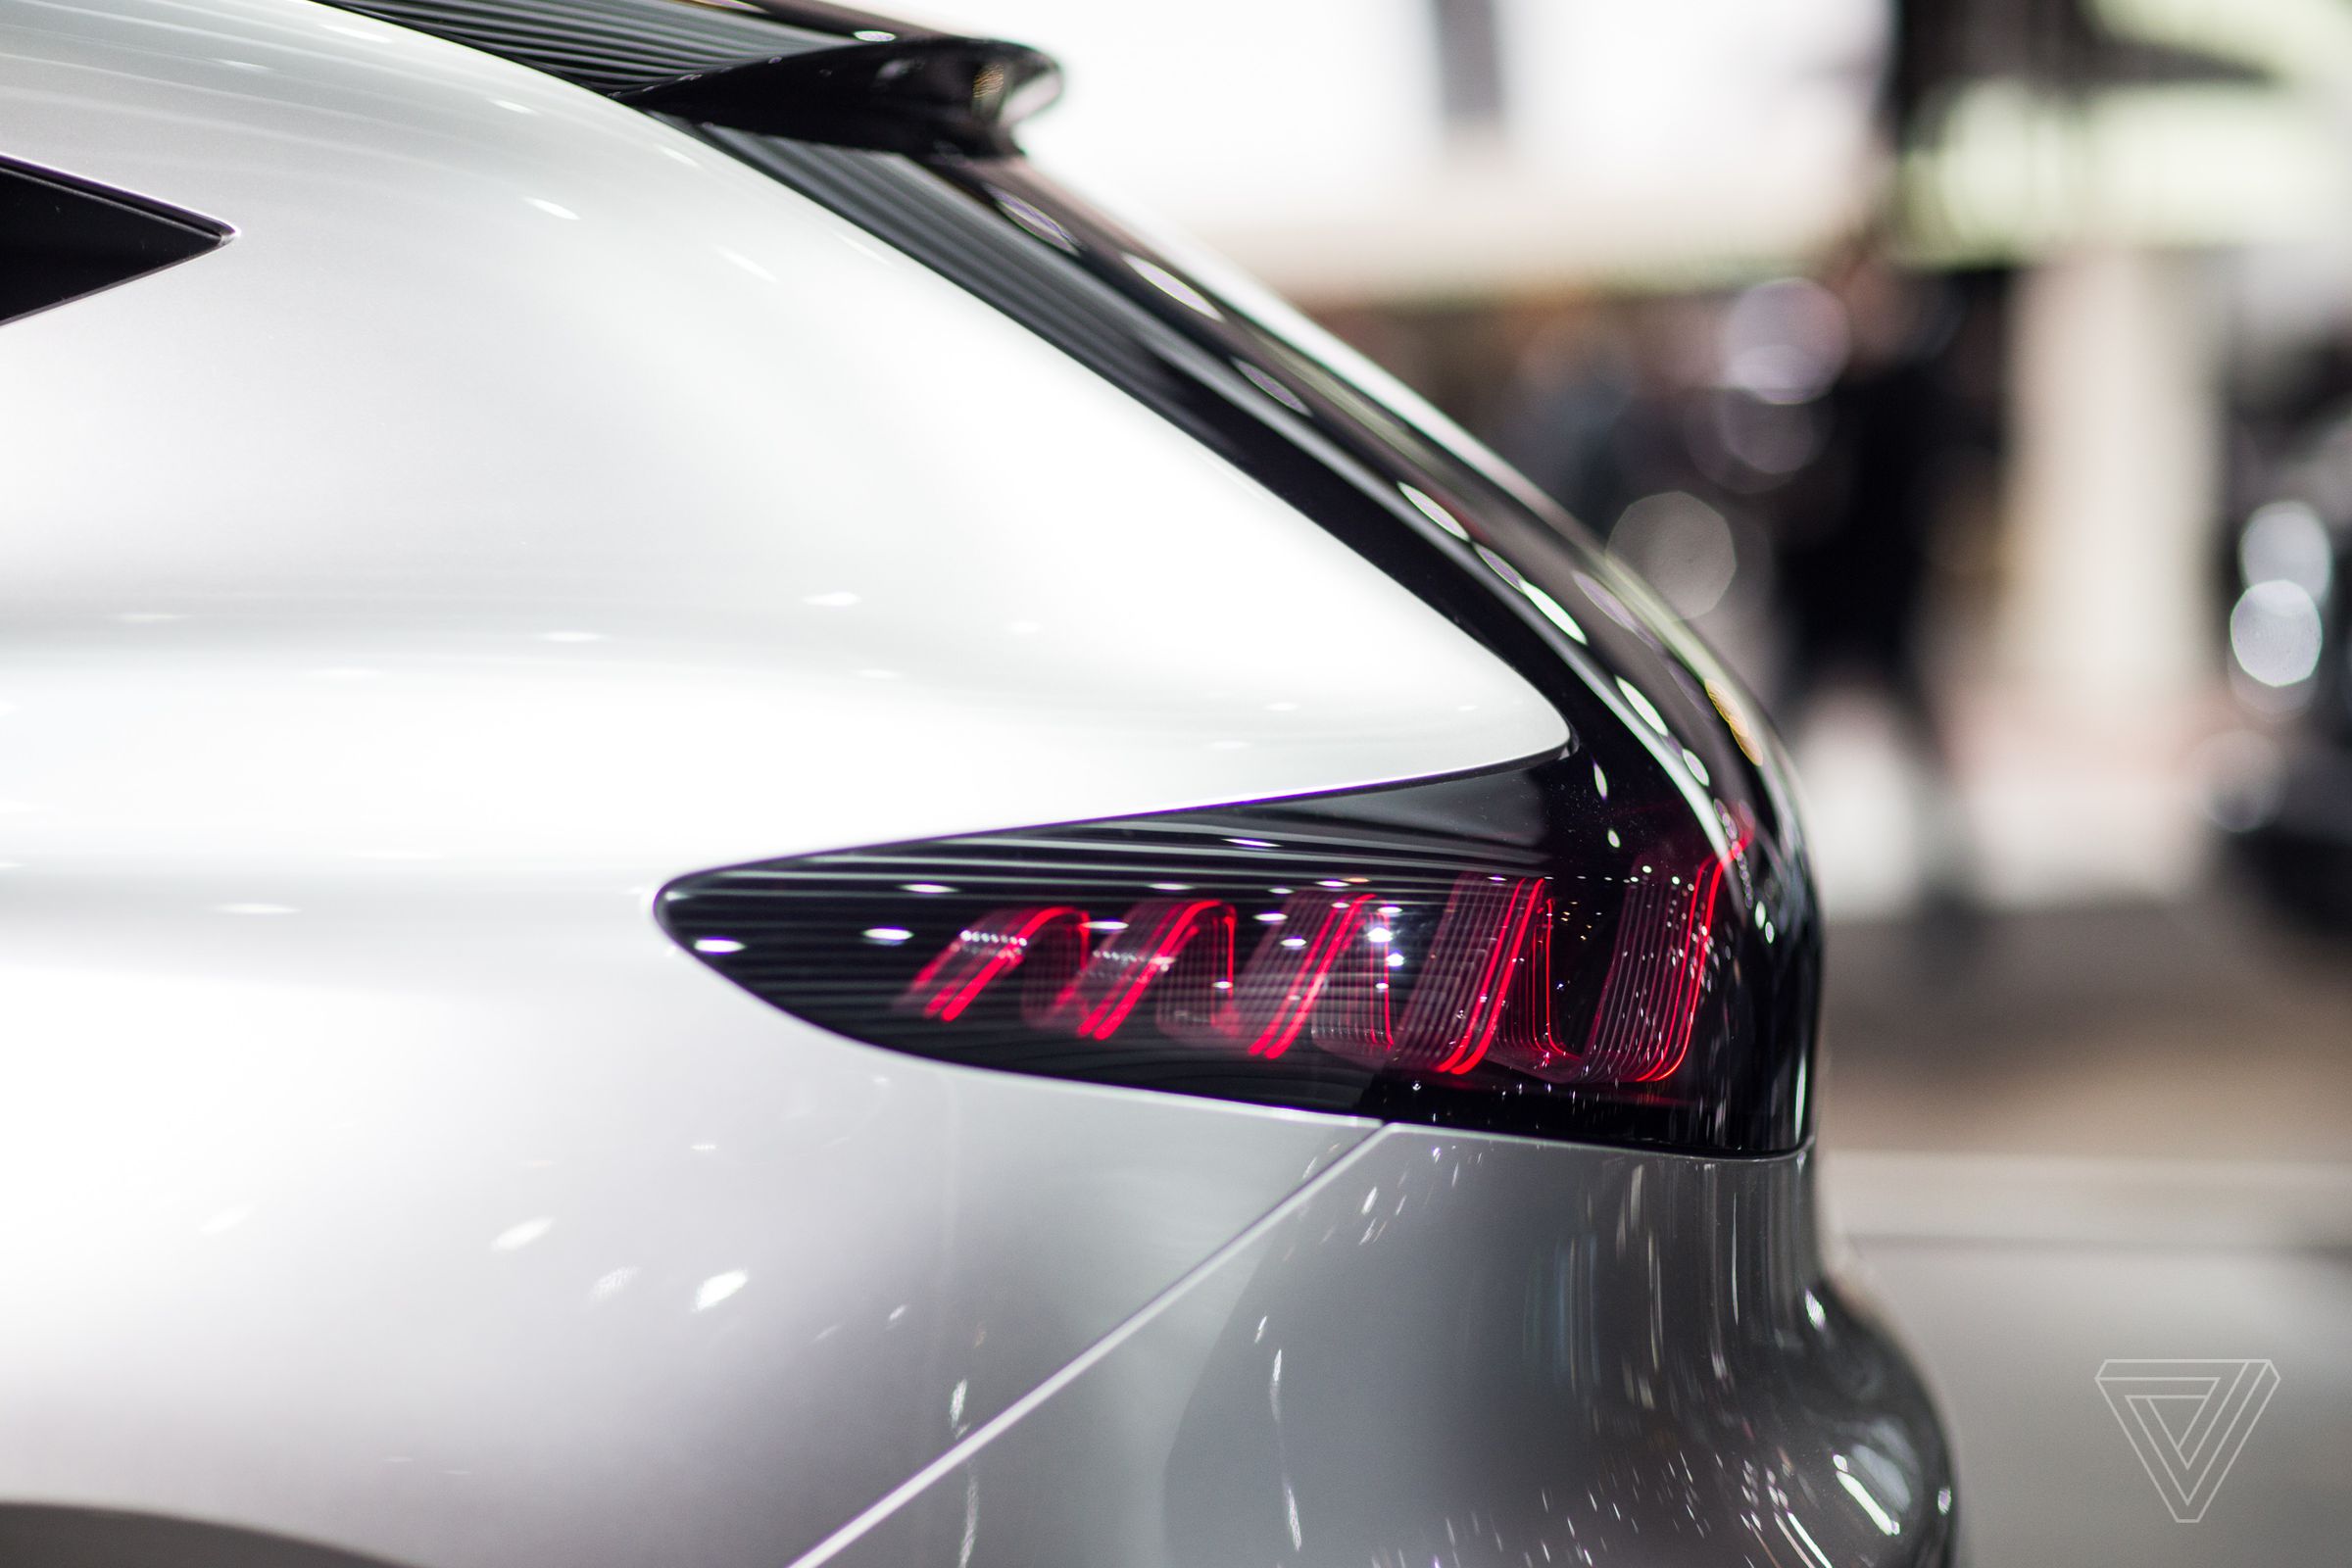 The wavy tail lights of the EQA concept flicker and pulse.